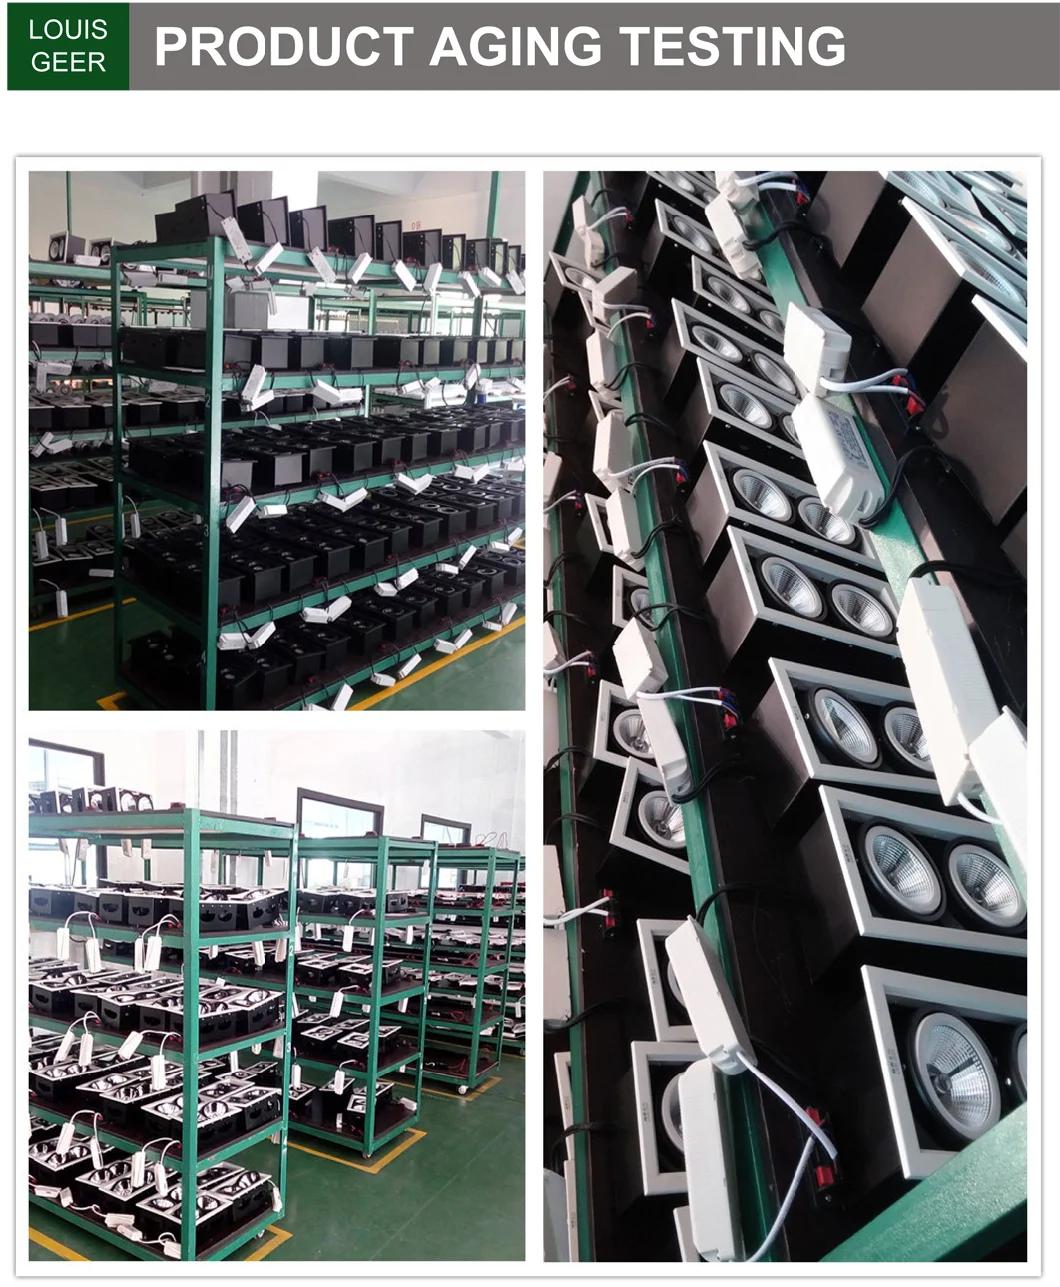 Factory Direct Supply Energy Saving Commercial Lighting 15W Ce RoHS COB LED Grille Light